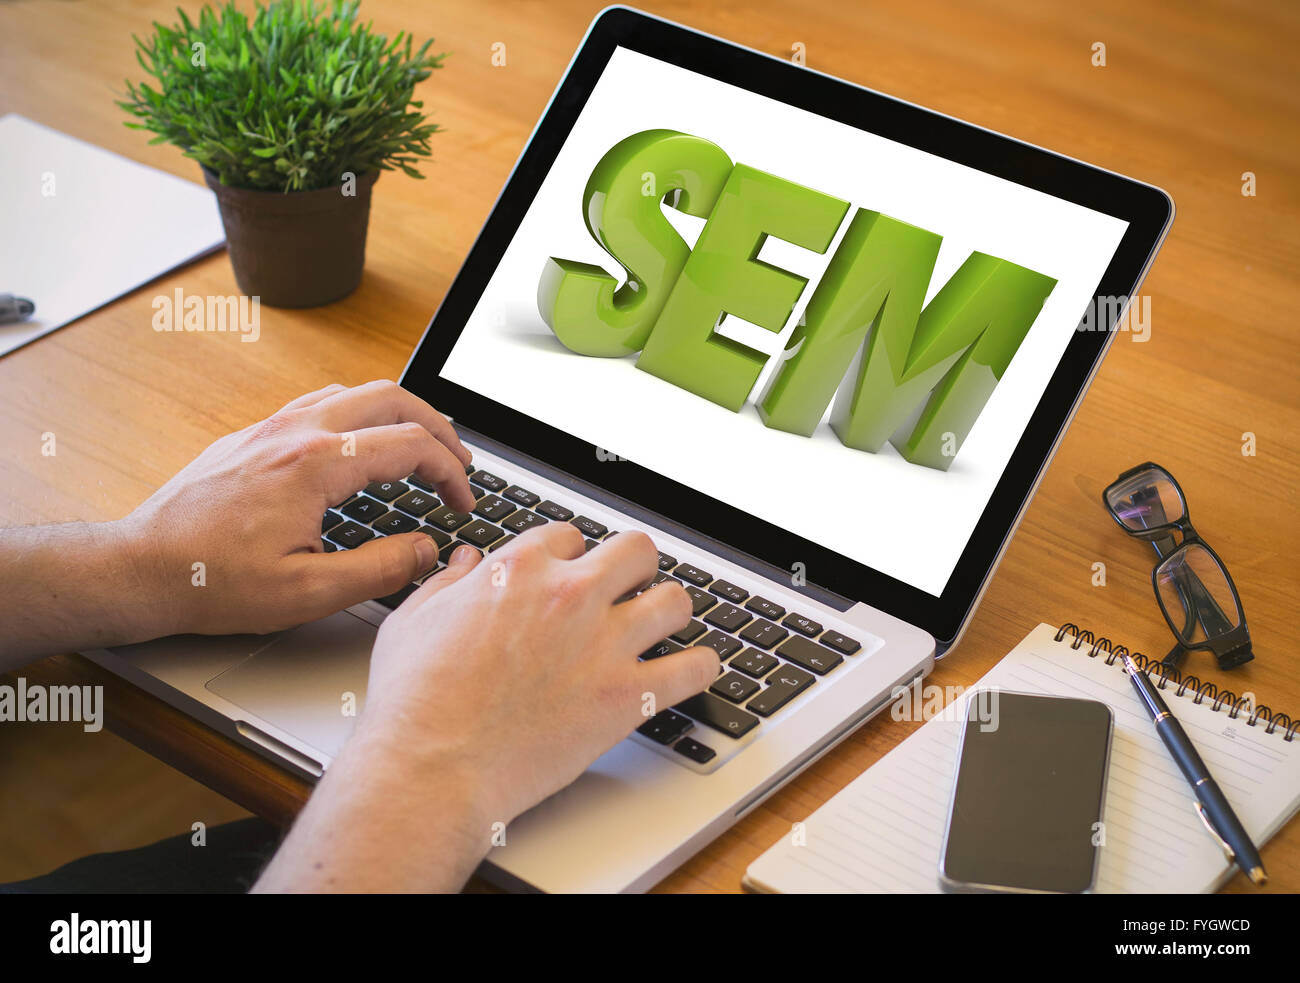 sem concept. Close-up top view of man working on laptop. all screen graphics are made up. Stock Photo